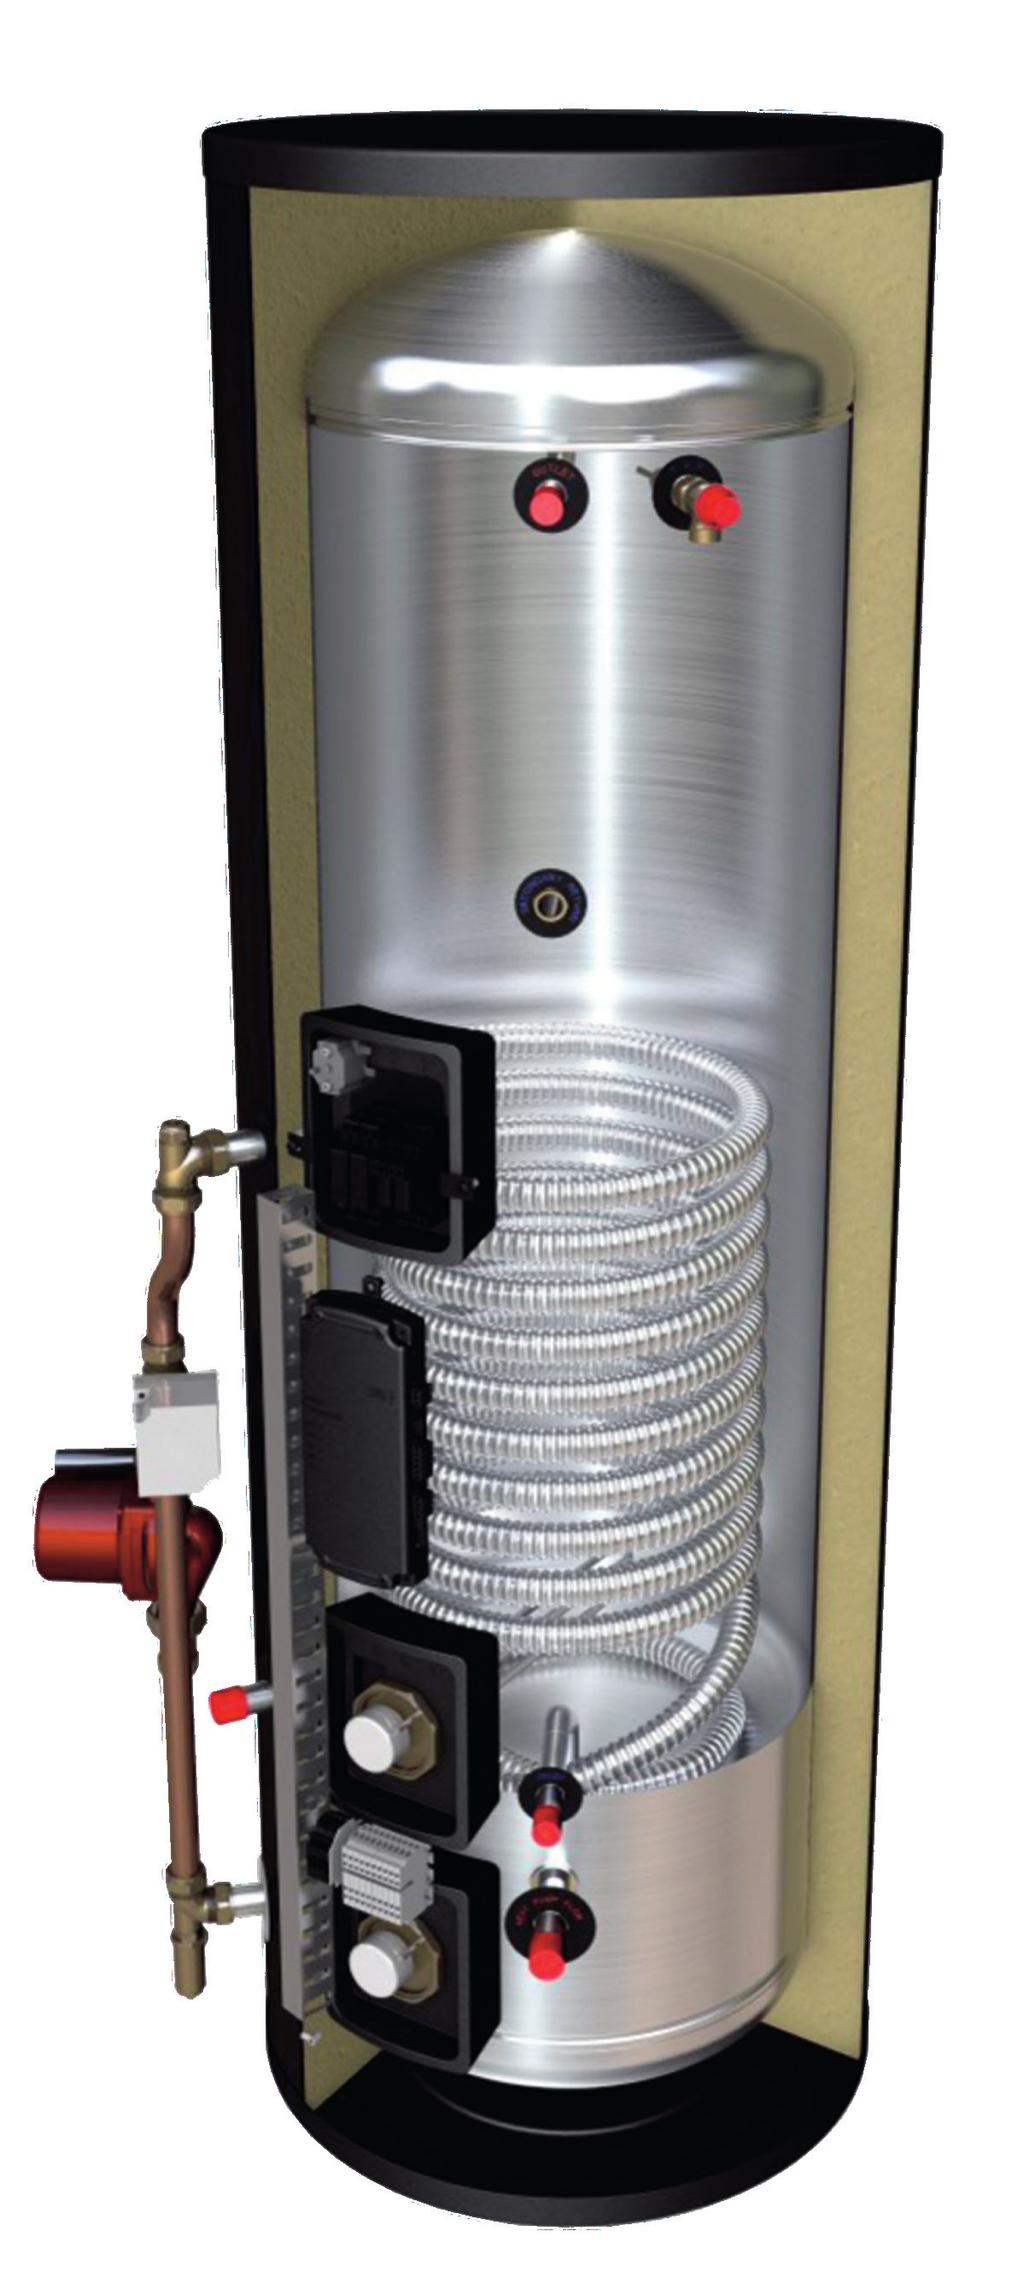 A-Class heat pump cylinders Unvented stainless steel cylinders for heat pumps Sustainable material Inner vessel manufactured from premium grade Duplex stainless steel Lightweight yet ultra-high